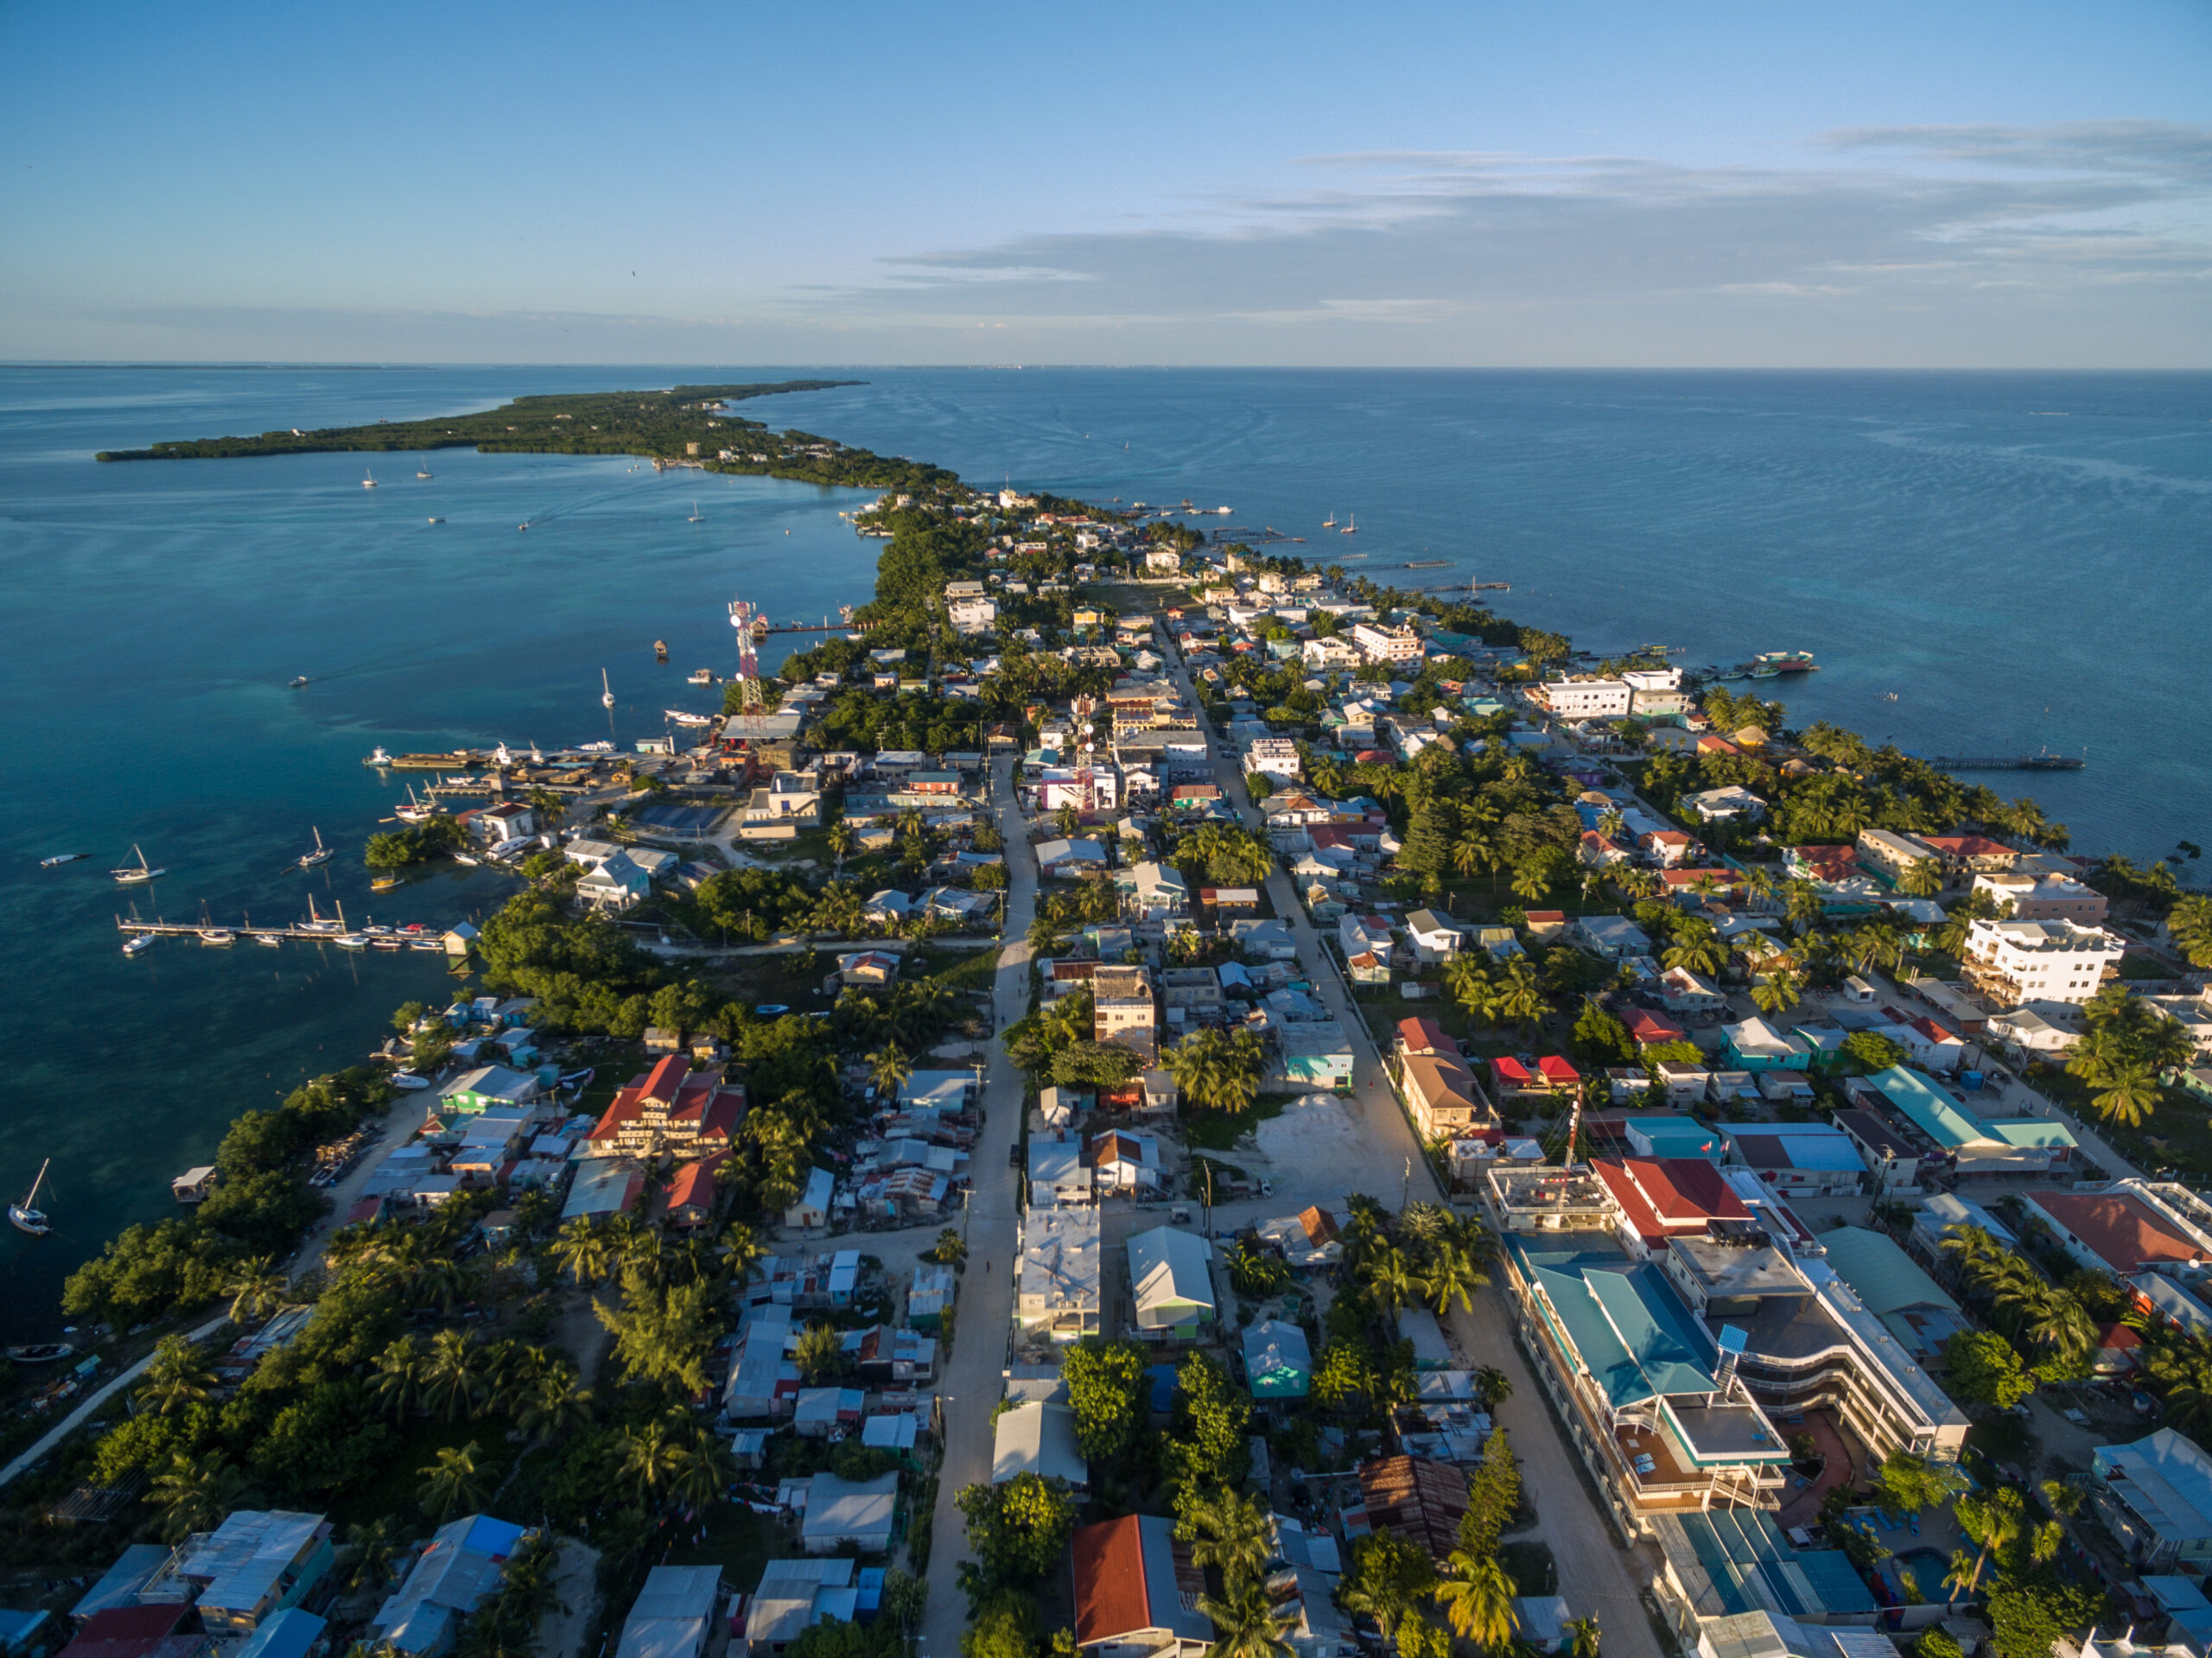 Caye Caulker Island in Belize, Caribbean Sea. Drone Point of View. Small island surrounded by the ocean on a cloudy day. Rooftops and streets can be seen on the tropical island below.